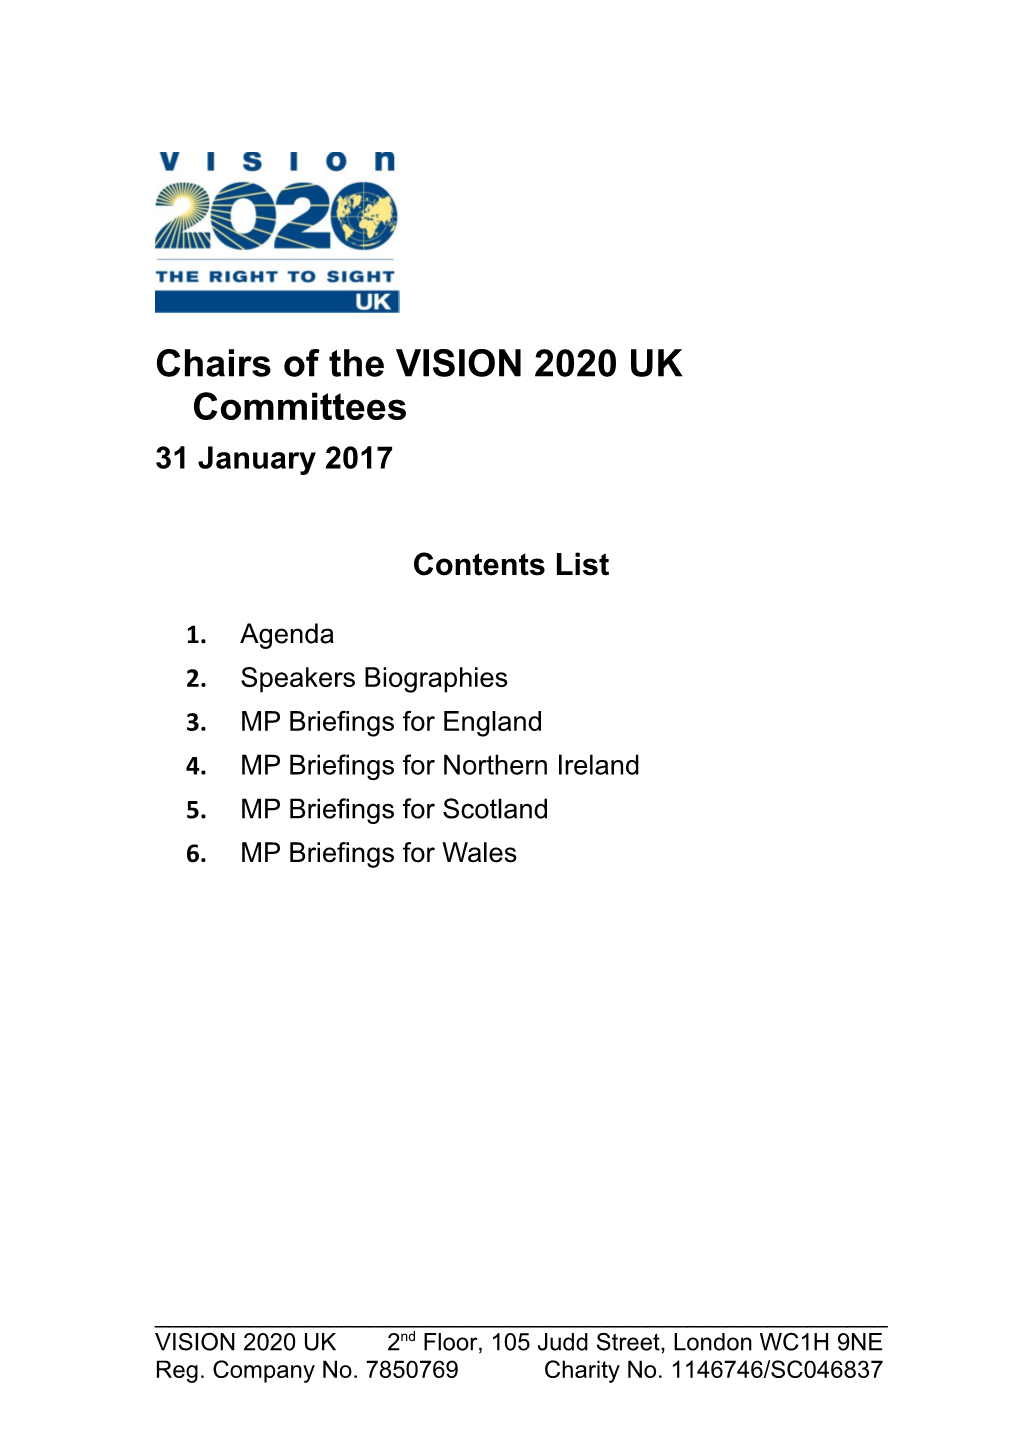 Chairs of the VISION 2020 Ukcommittees